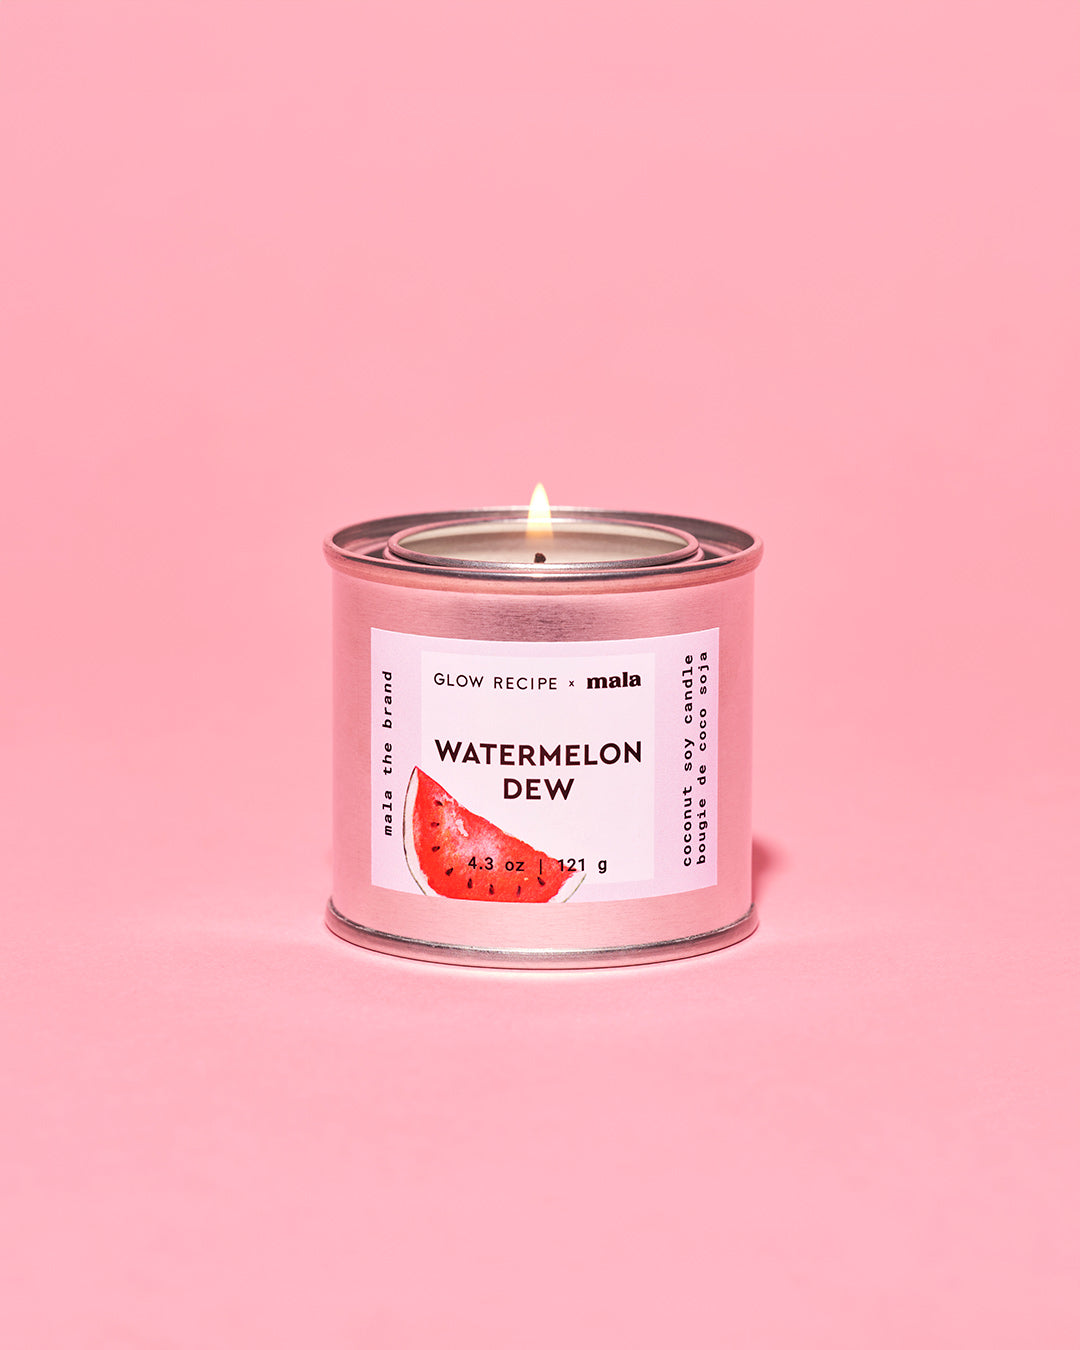 Glow Candle Co., Eco-Friendly, Hand Poured